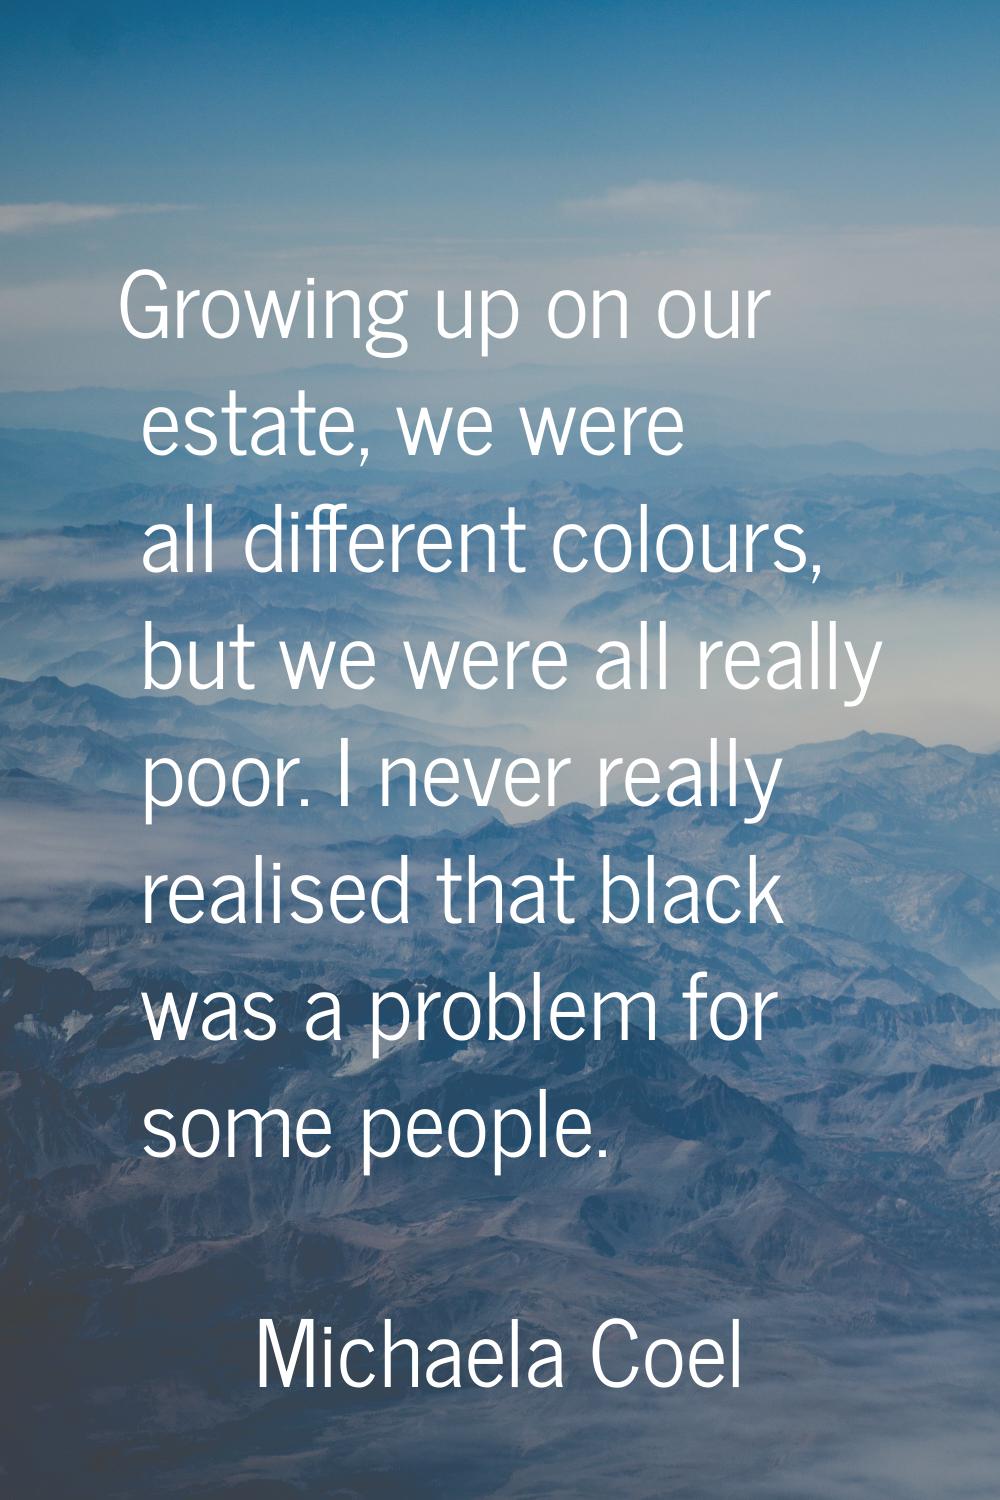 Growing up on our estate, we were all different colours, but we were all really poor. I never reall